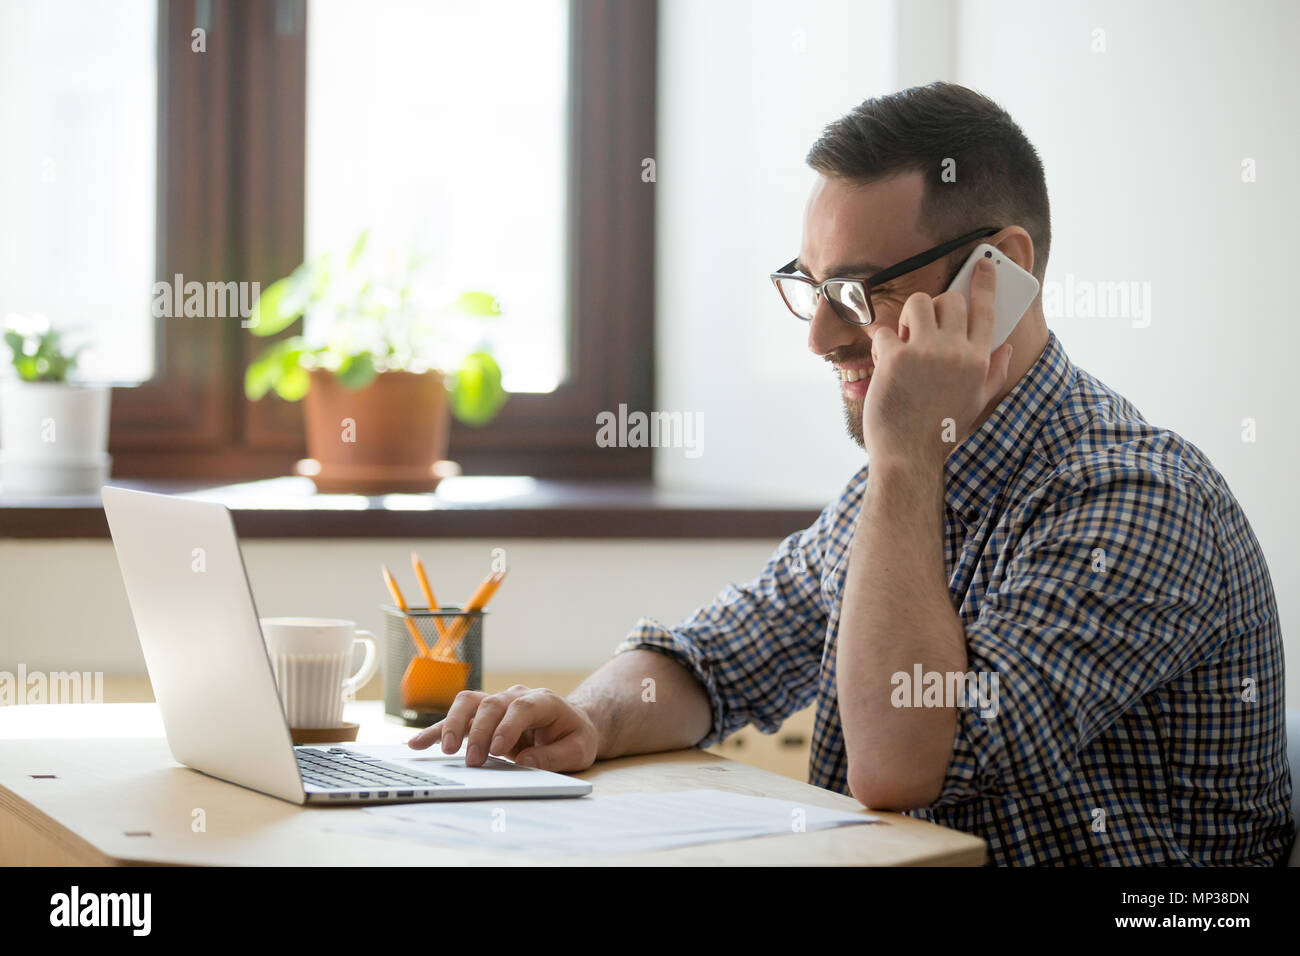 Smiling male consulting client online Stock Photo